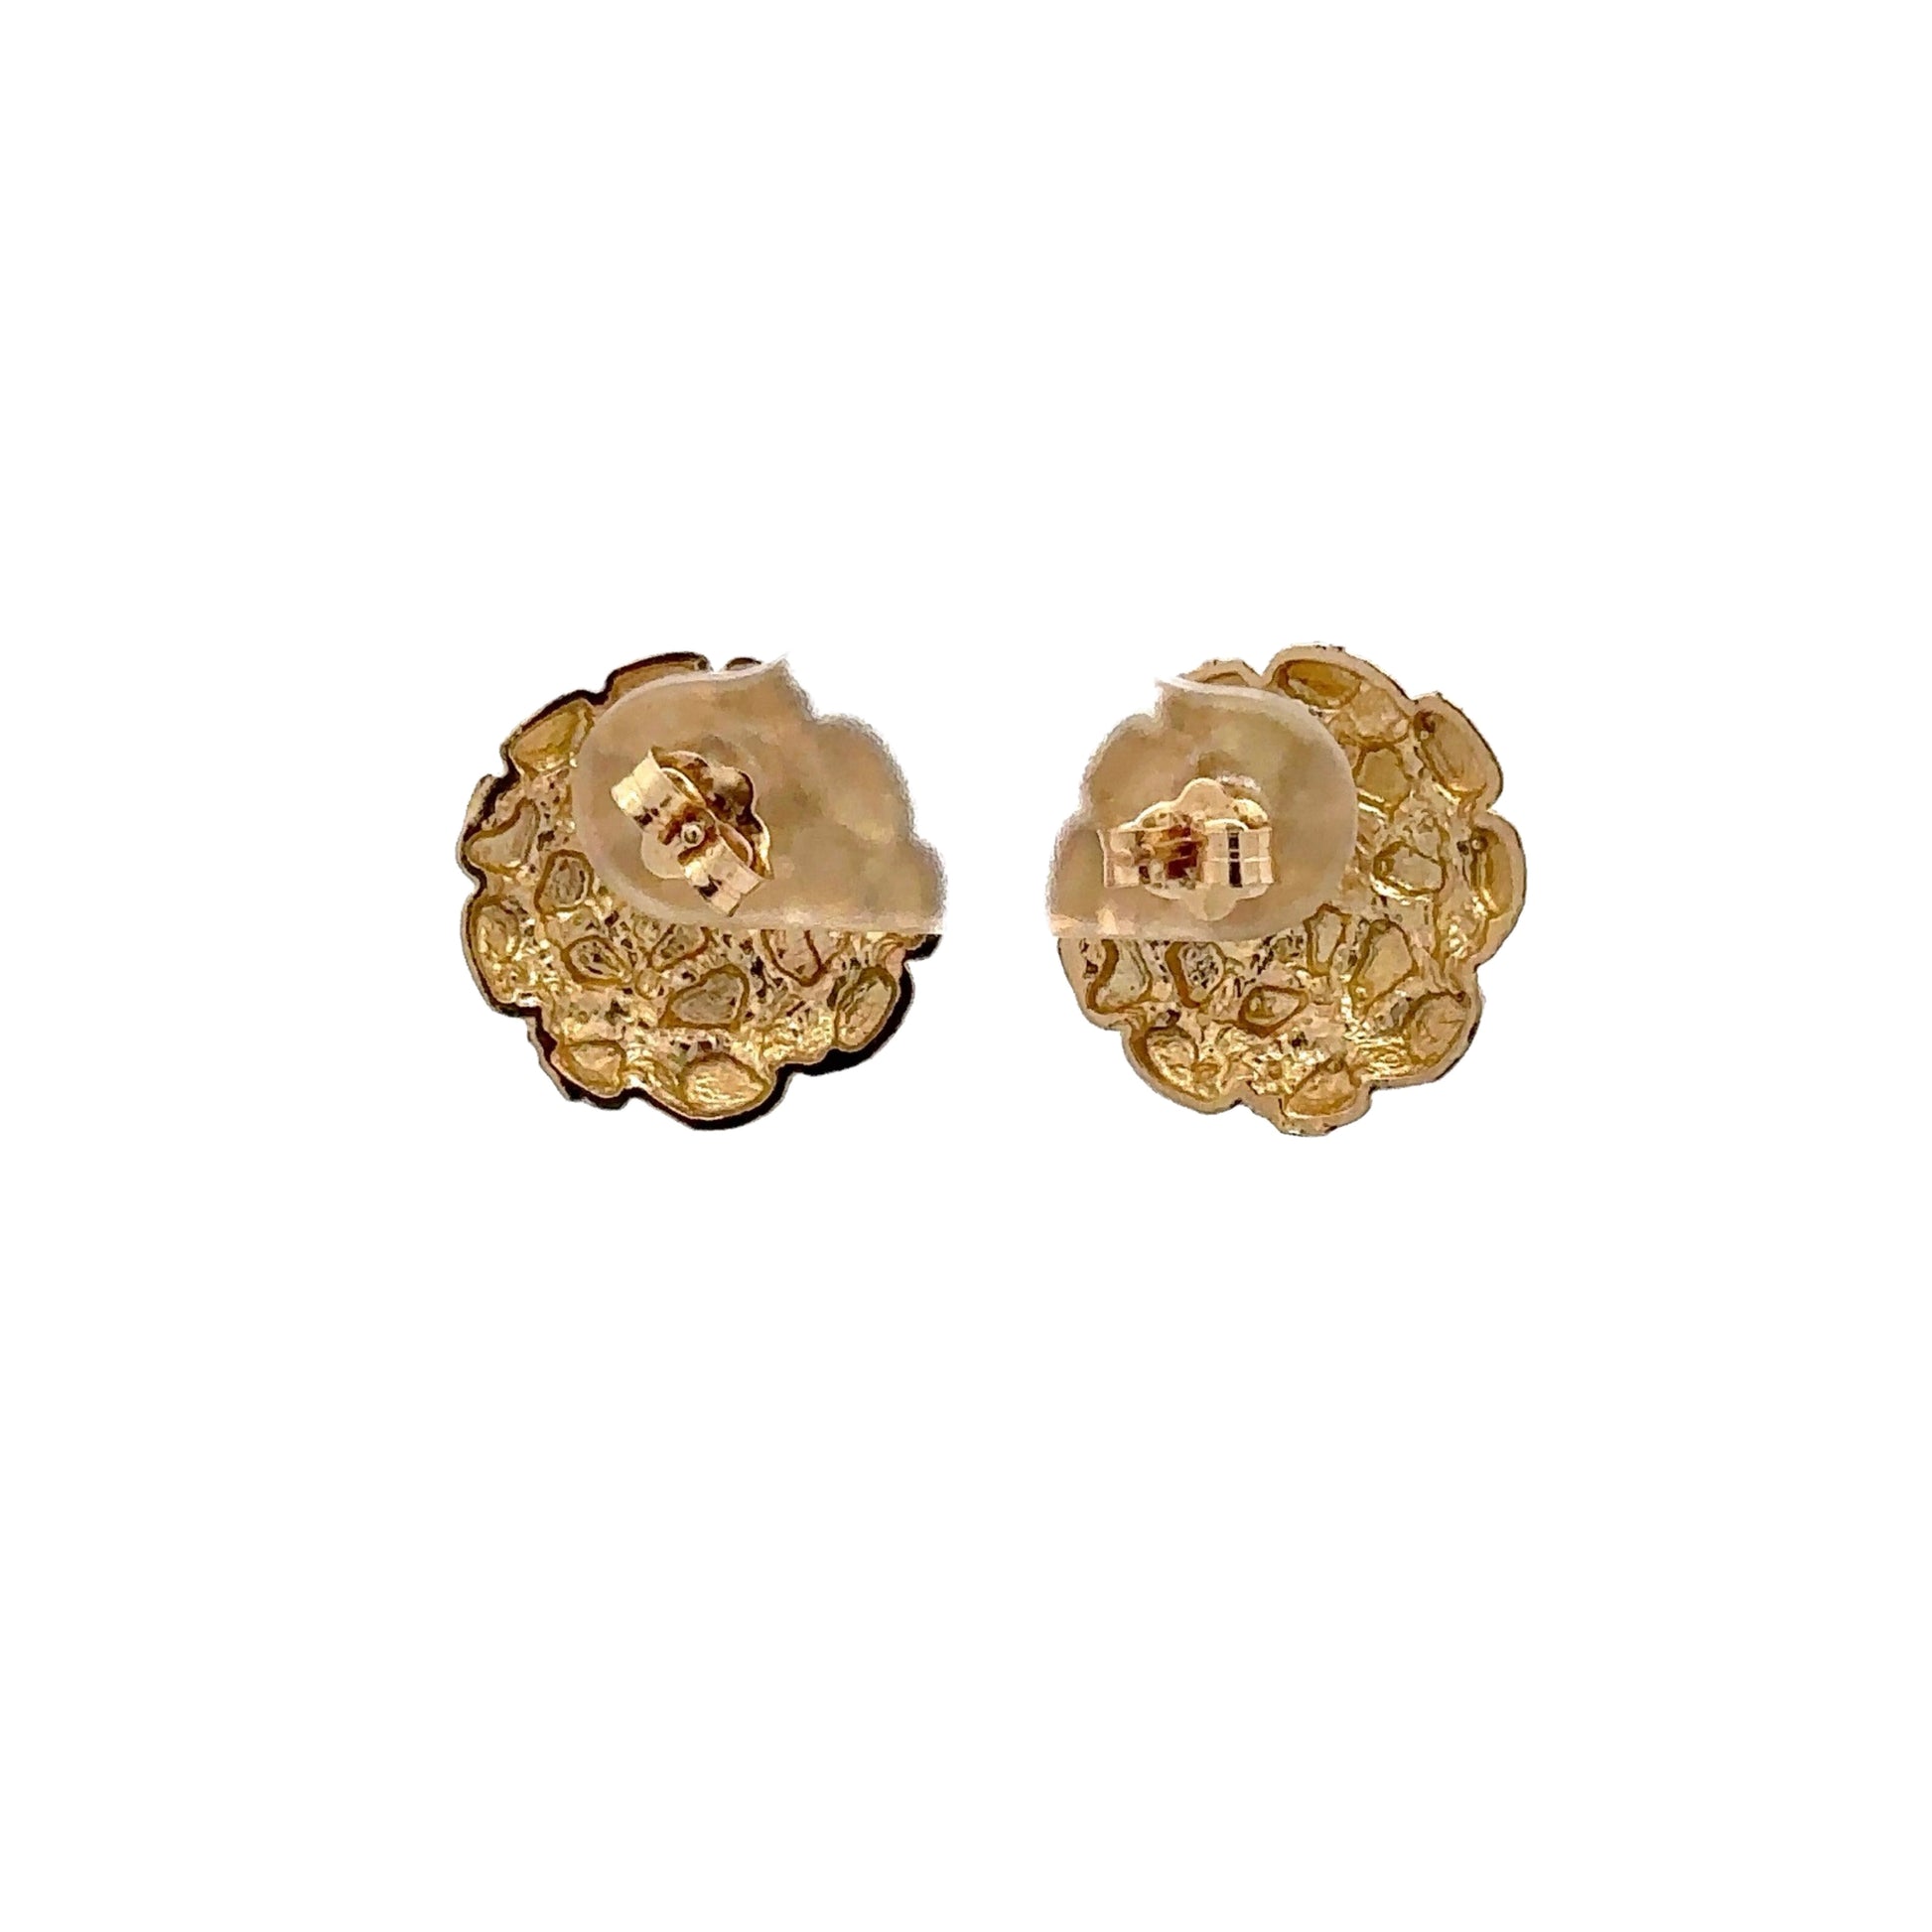 Back of yellow gold nugget earrings with pushback closure